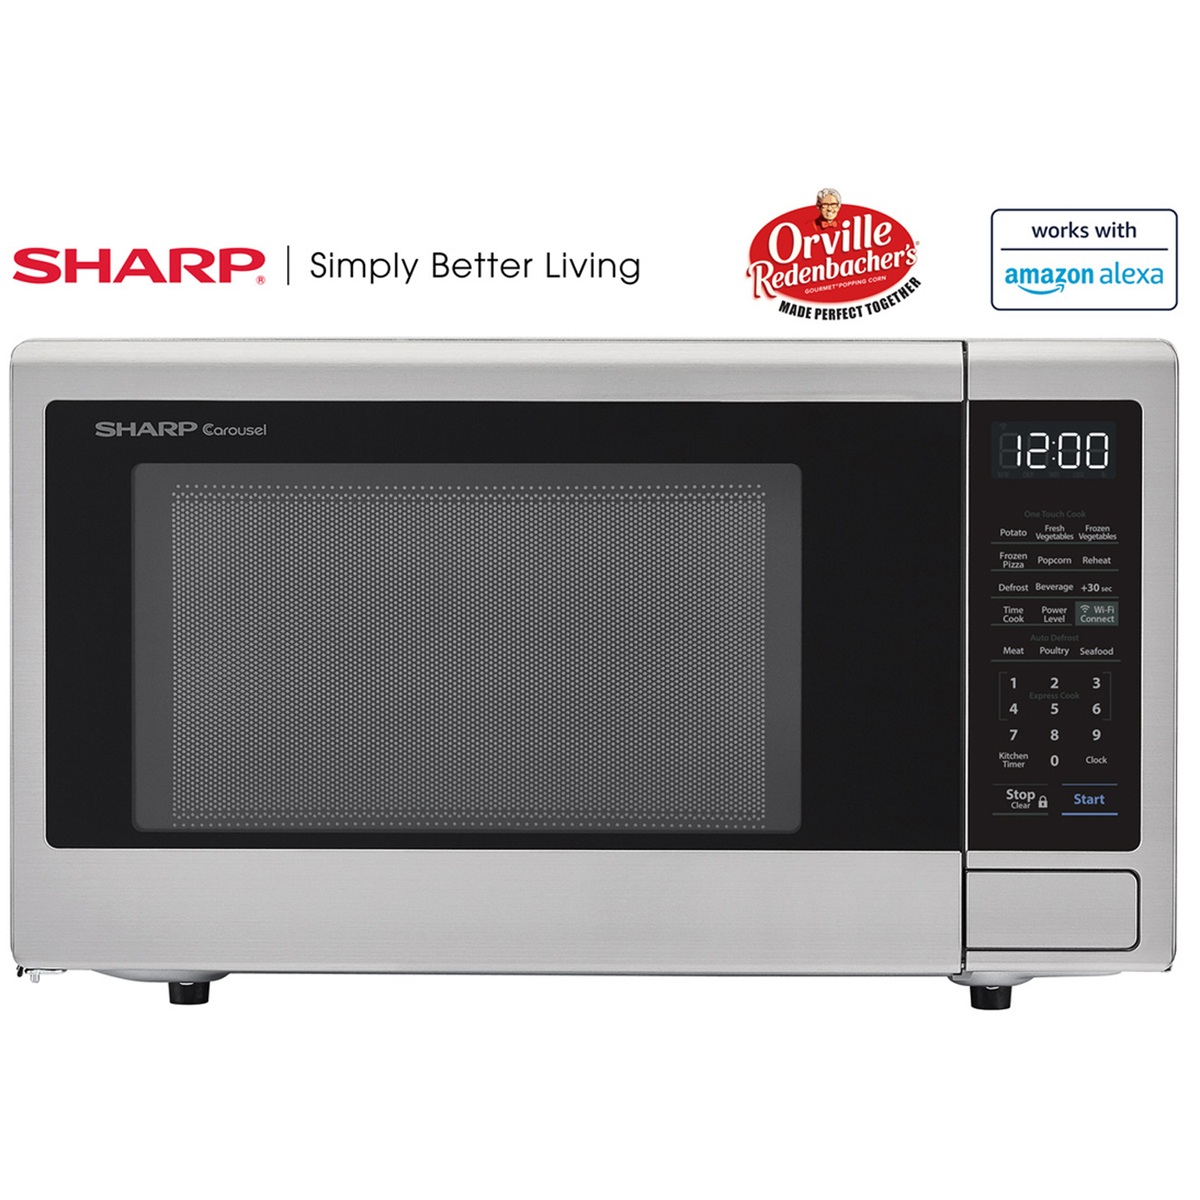 1.1 cu. ft. 1000W Sharp Stainless Steel Smart Carousel Countertop Microwave Oven (SMC1139FS) - image 4 of 10